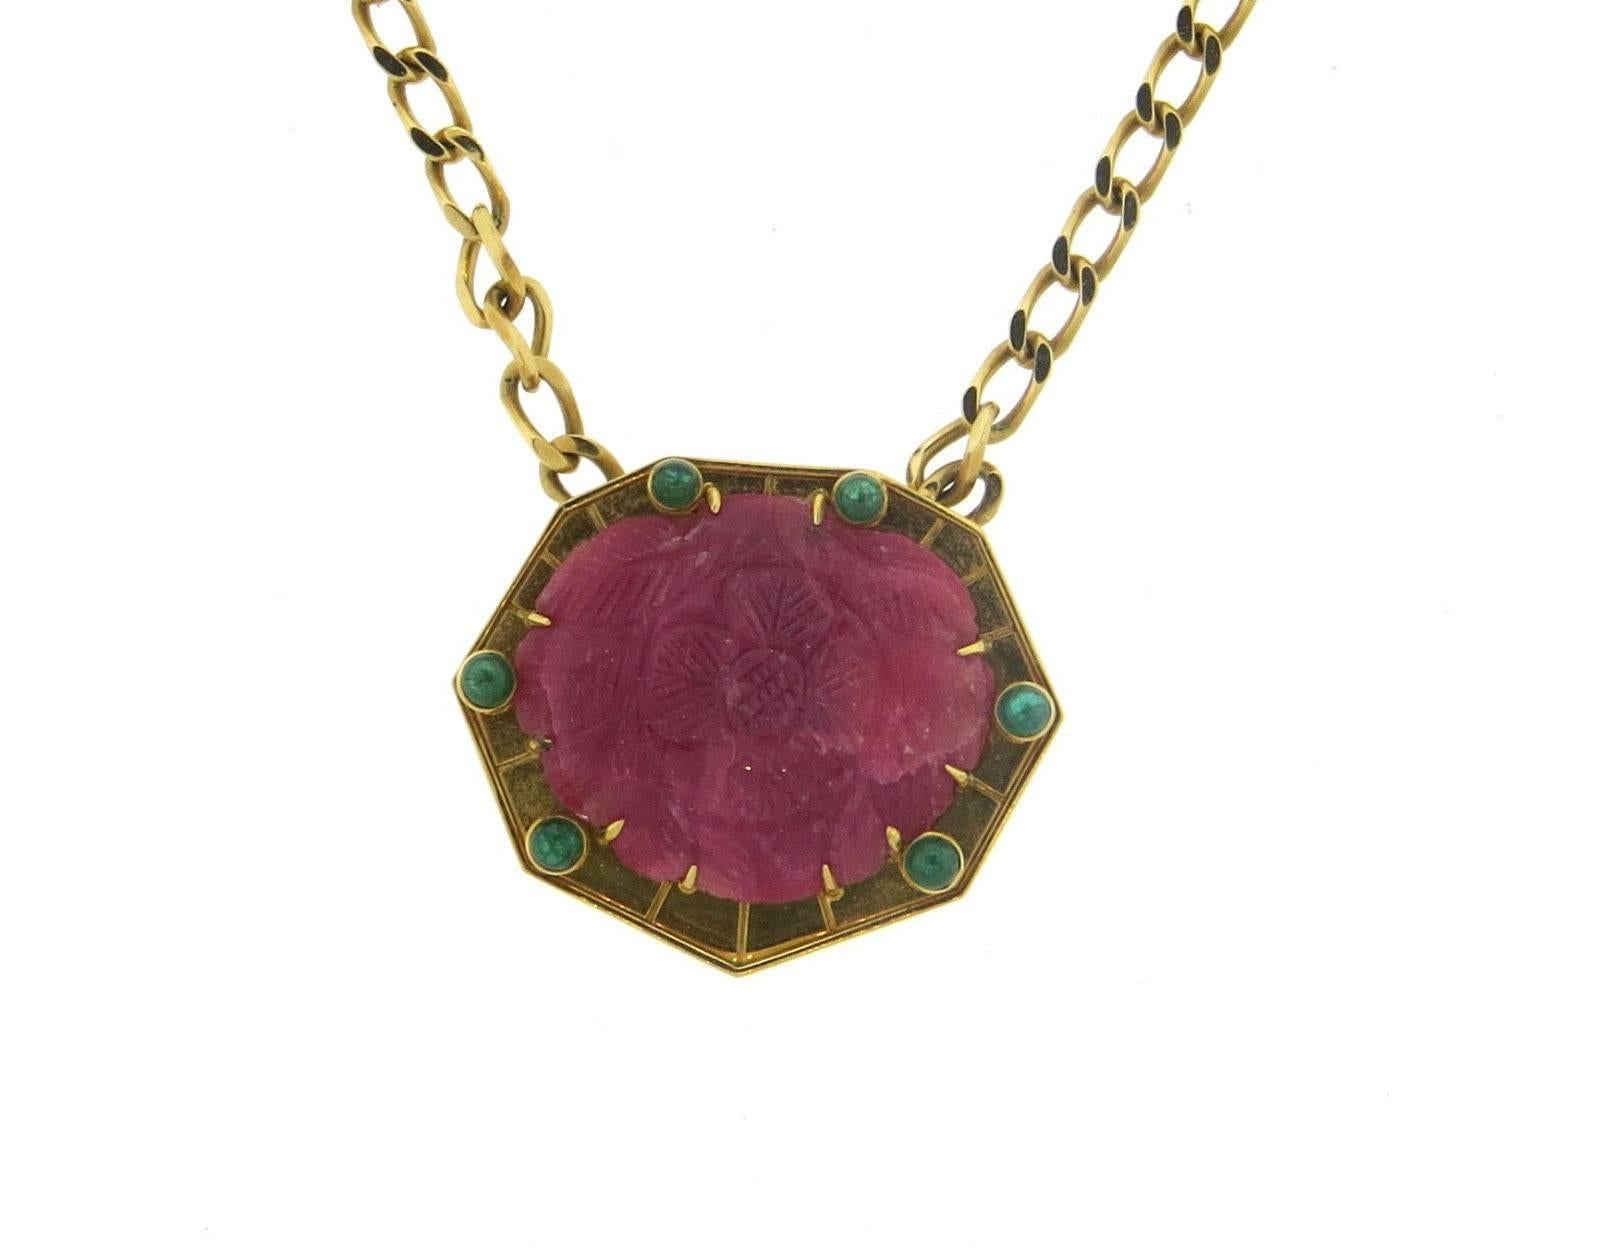 An 18k yellow gold necklace set with a carved ruby and emeralds. Created by David Webb, the necklace is 16 1/2